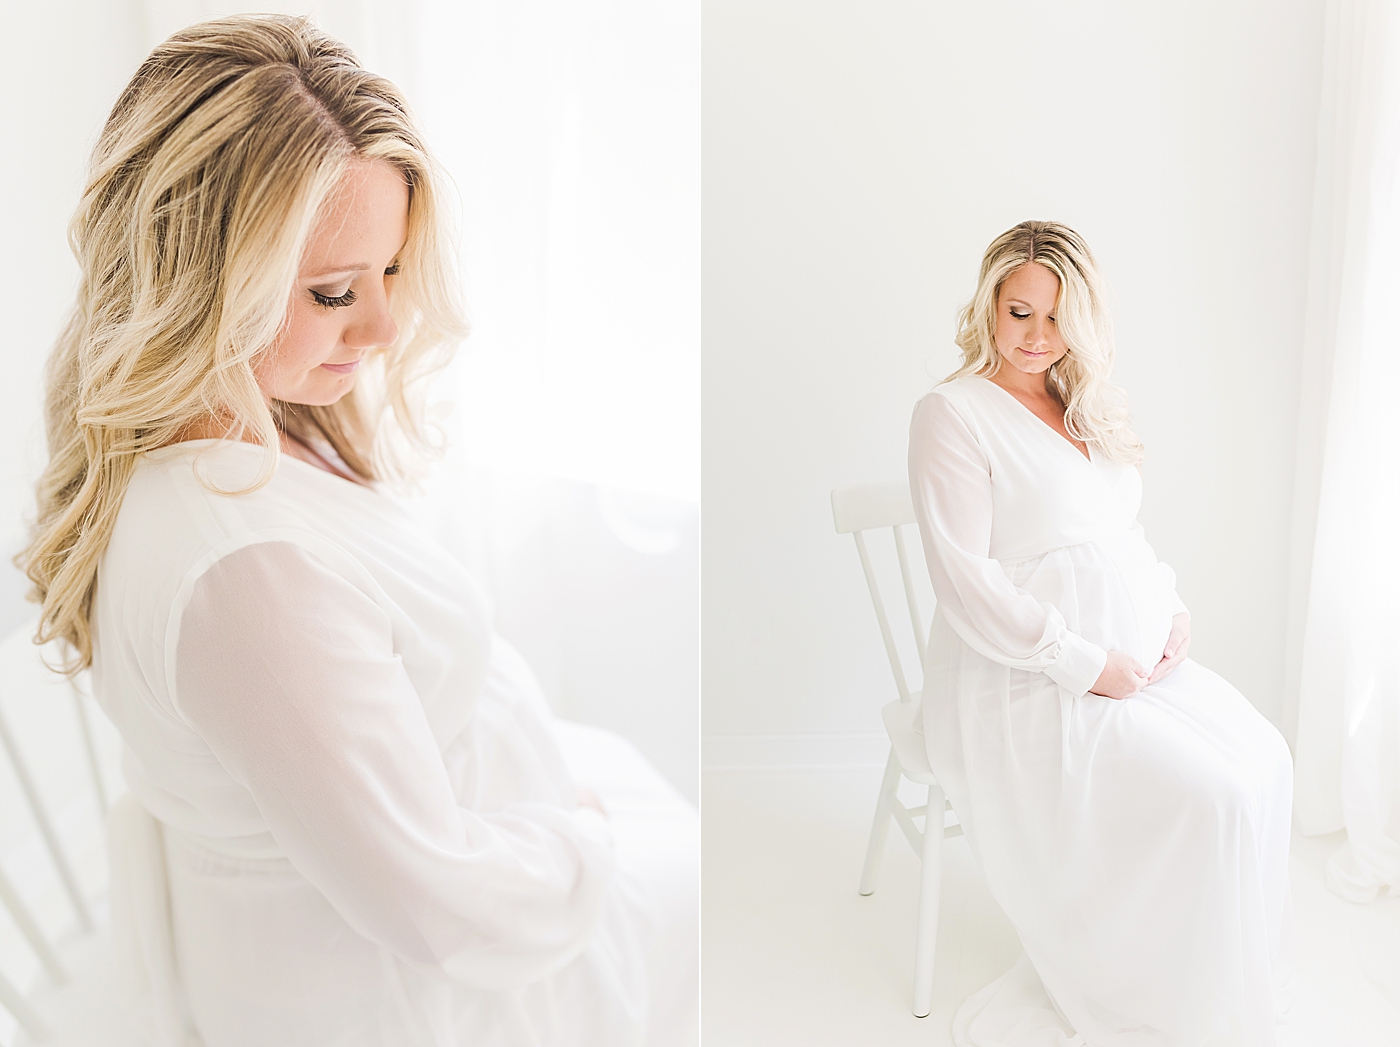 Pregnant woman in white dress sitting in white chair | Photo by Anna Wisjo Photography